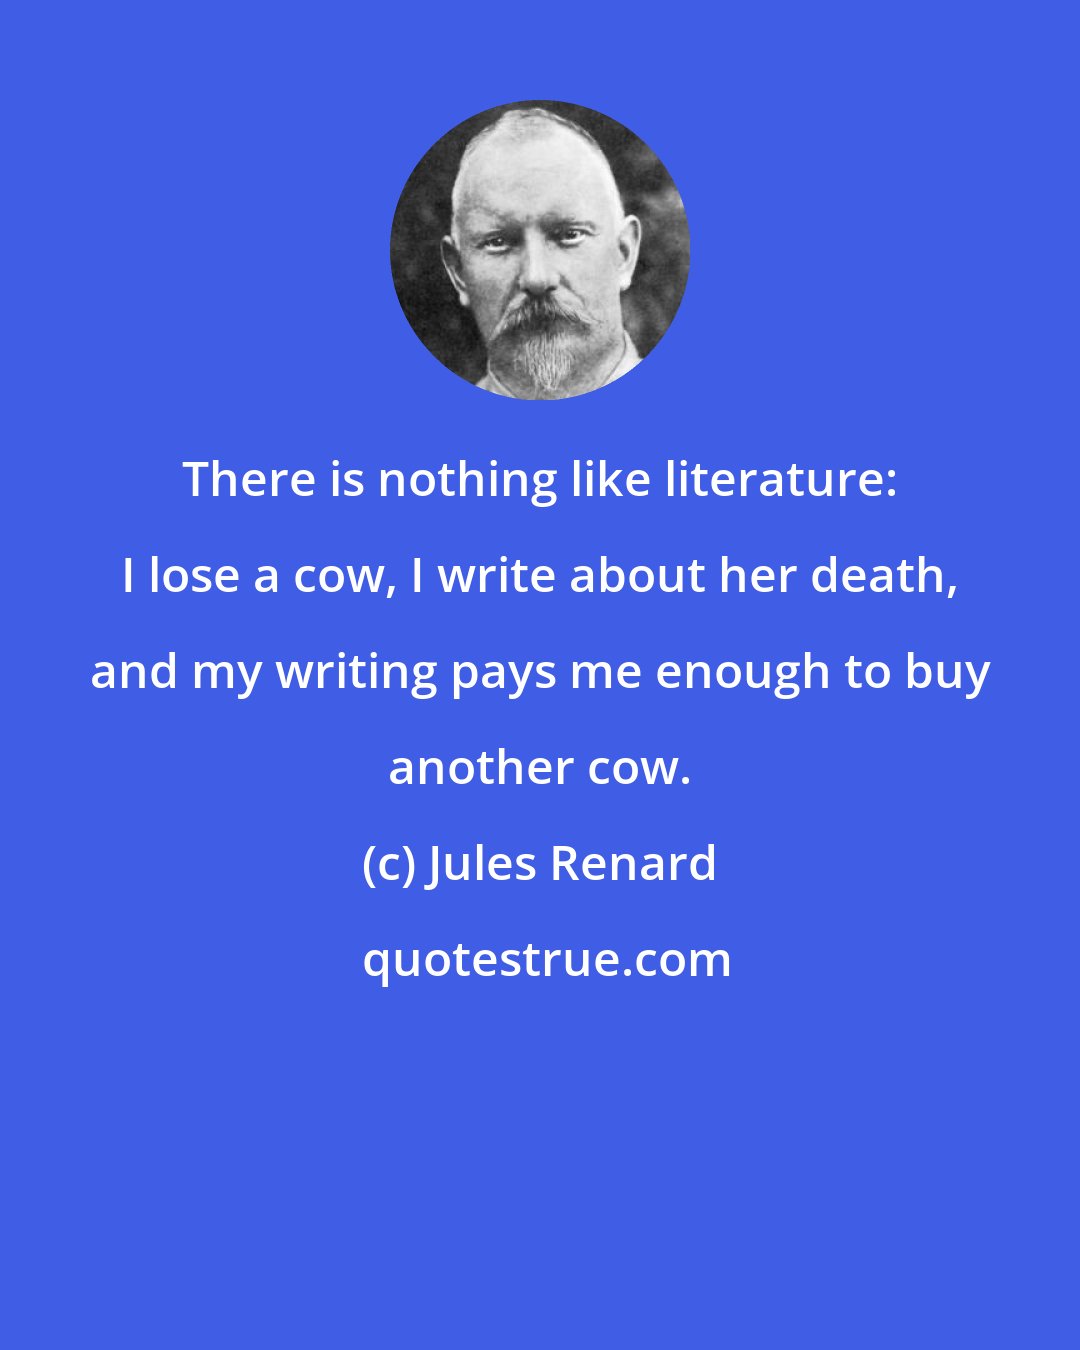 Jules Renard: There is nothing like literature: I lose a cow, I write about her death, and my writing pays me enough to buy another cow.